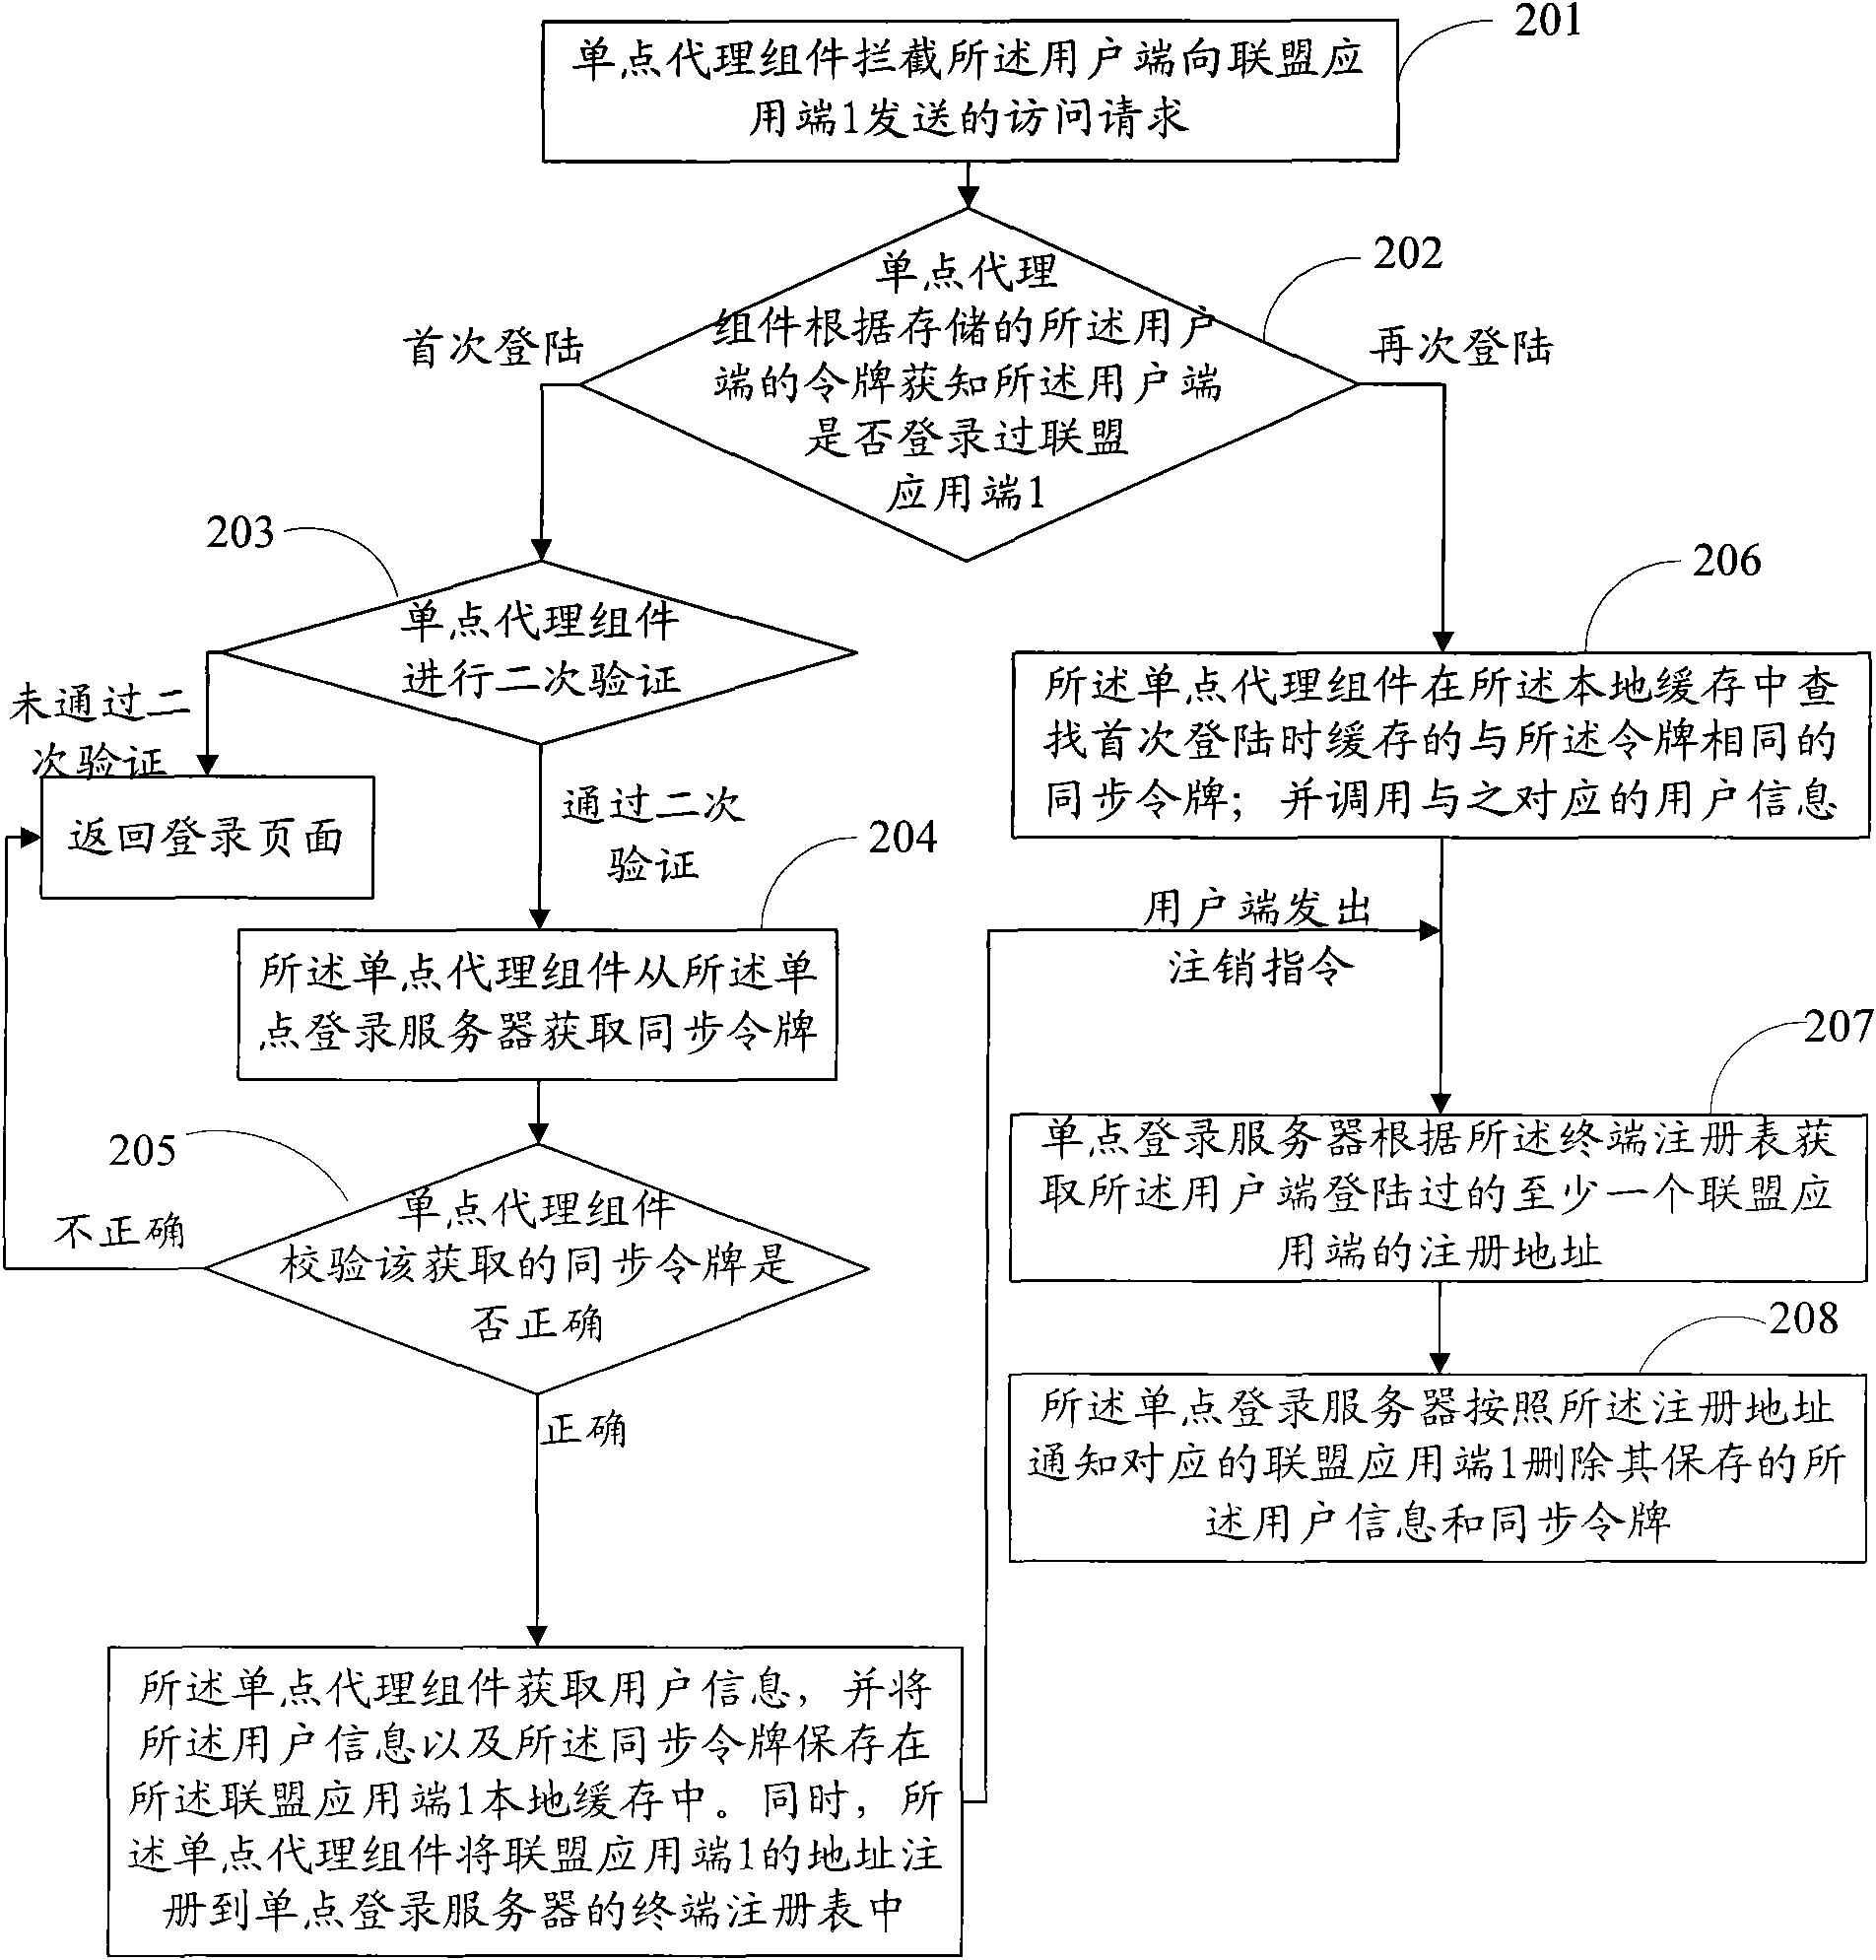 Cross-domain name single sign on and off method and system as well as corresponding equipment